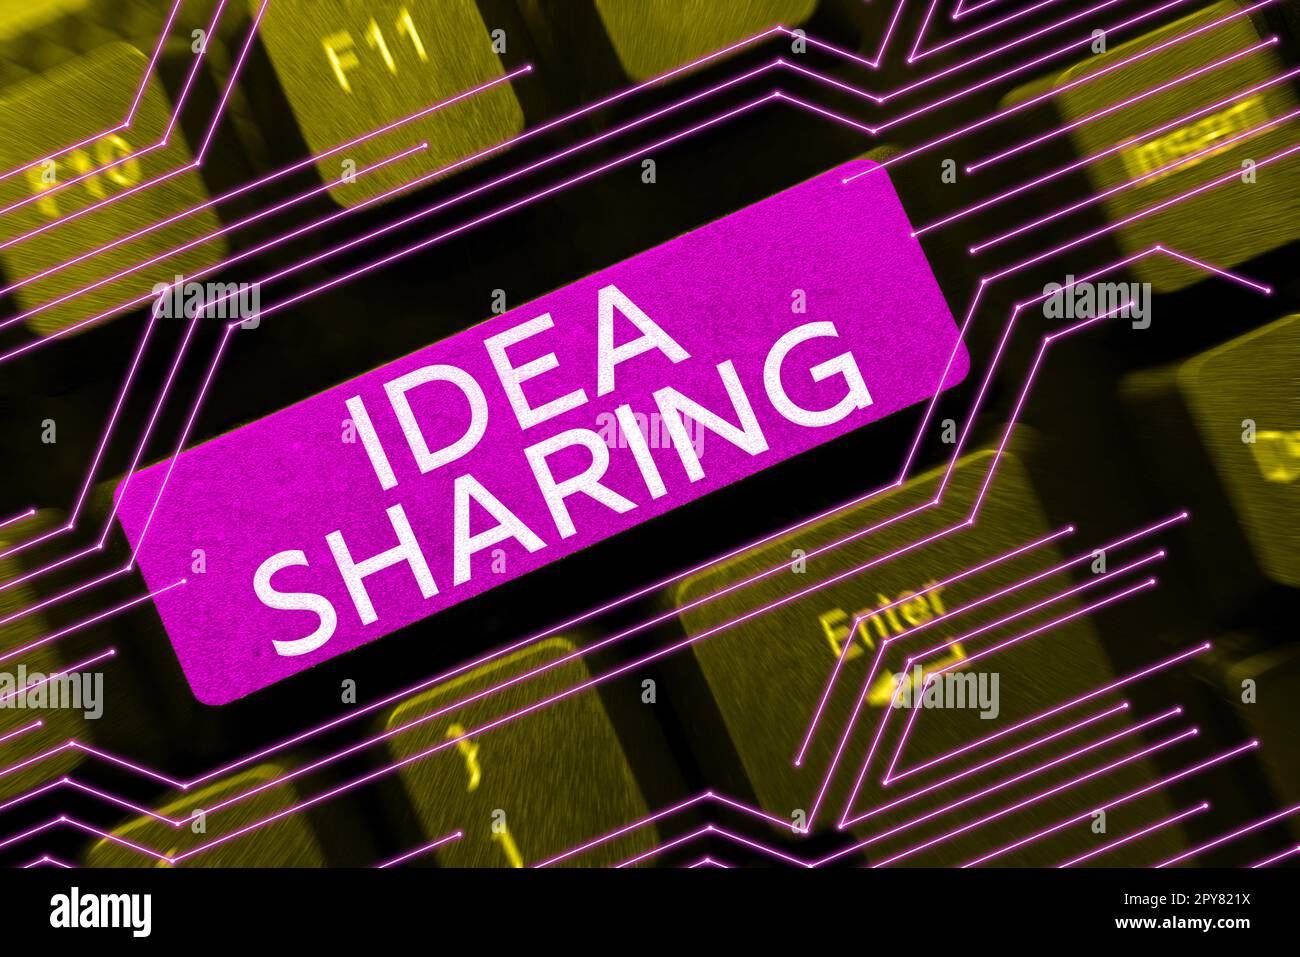 Text sign showing Idea Sharing. Concept meaning Startup launch innovation product, creative thinking Stock Photo